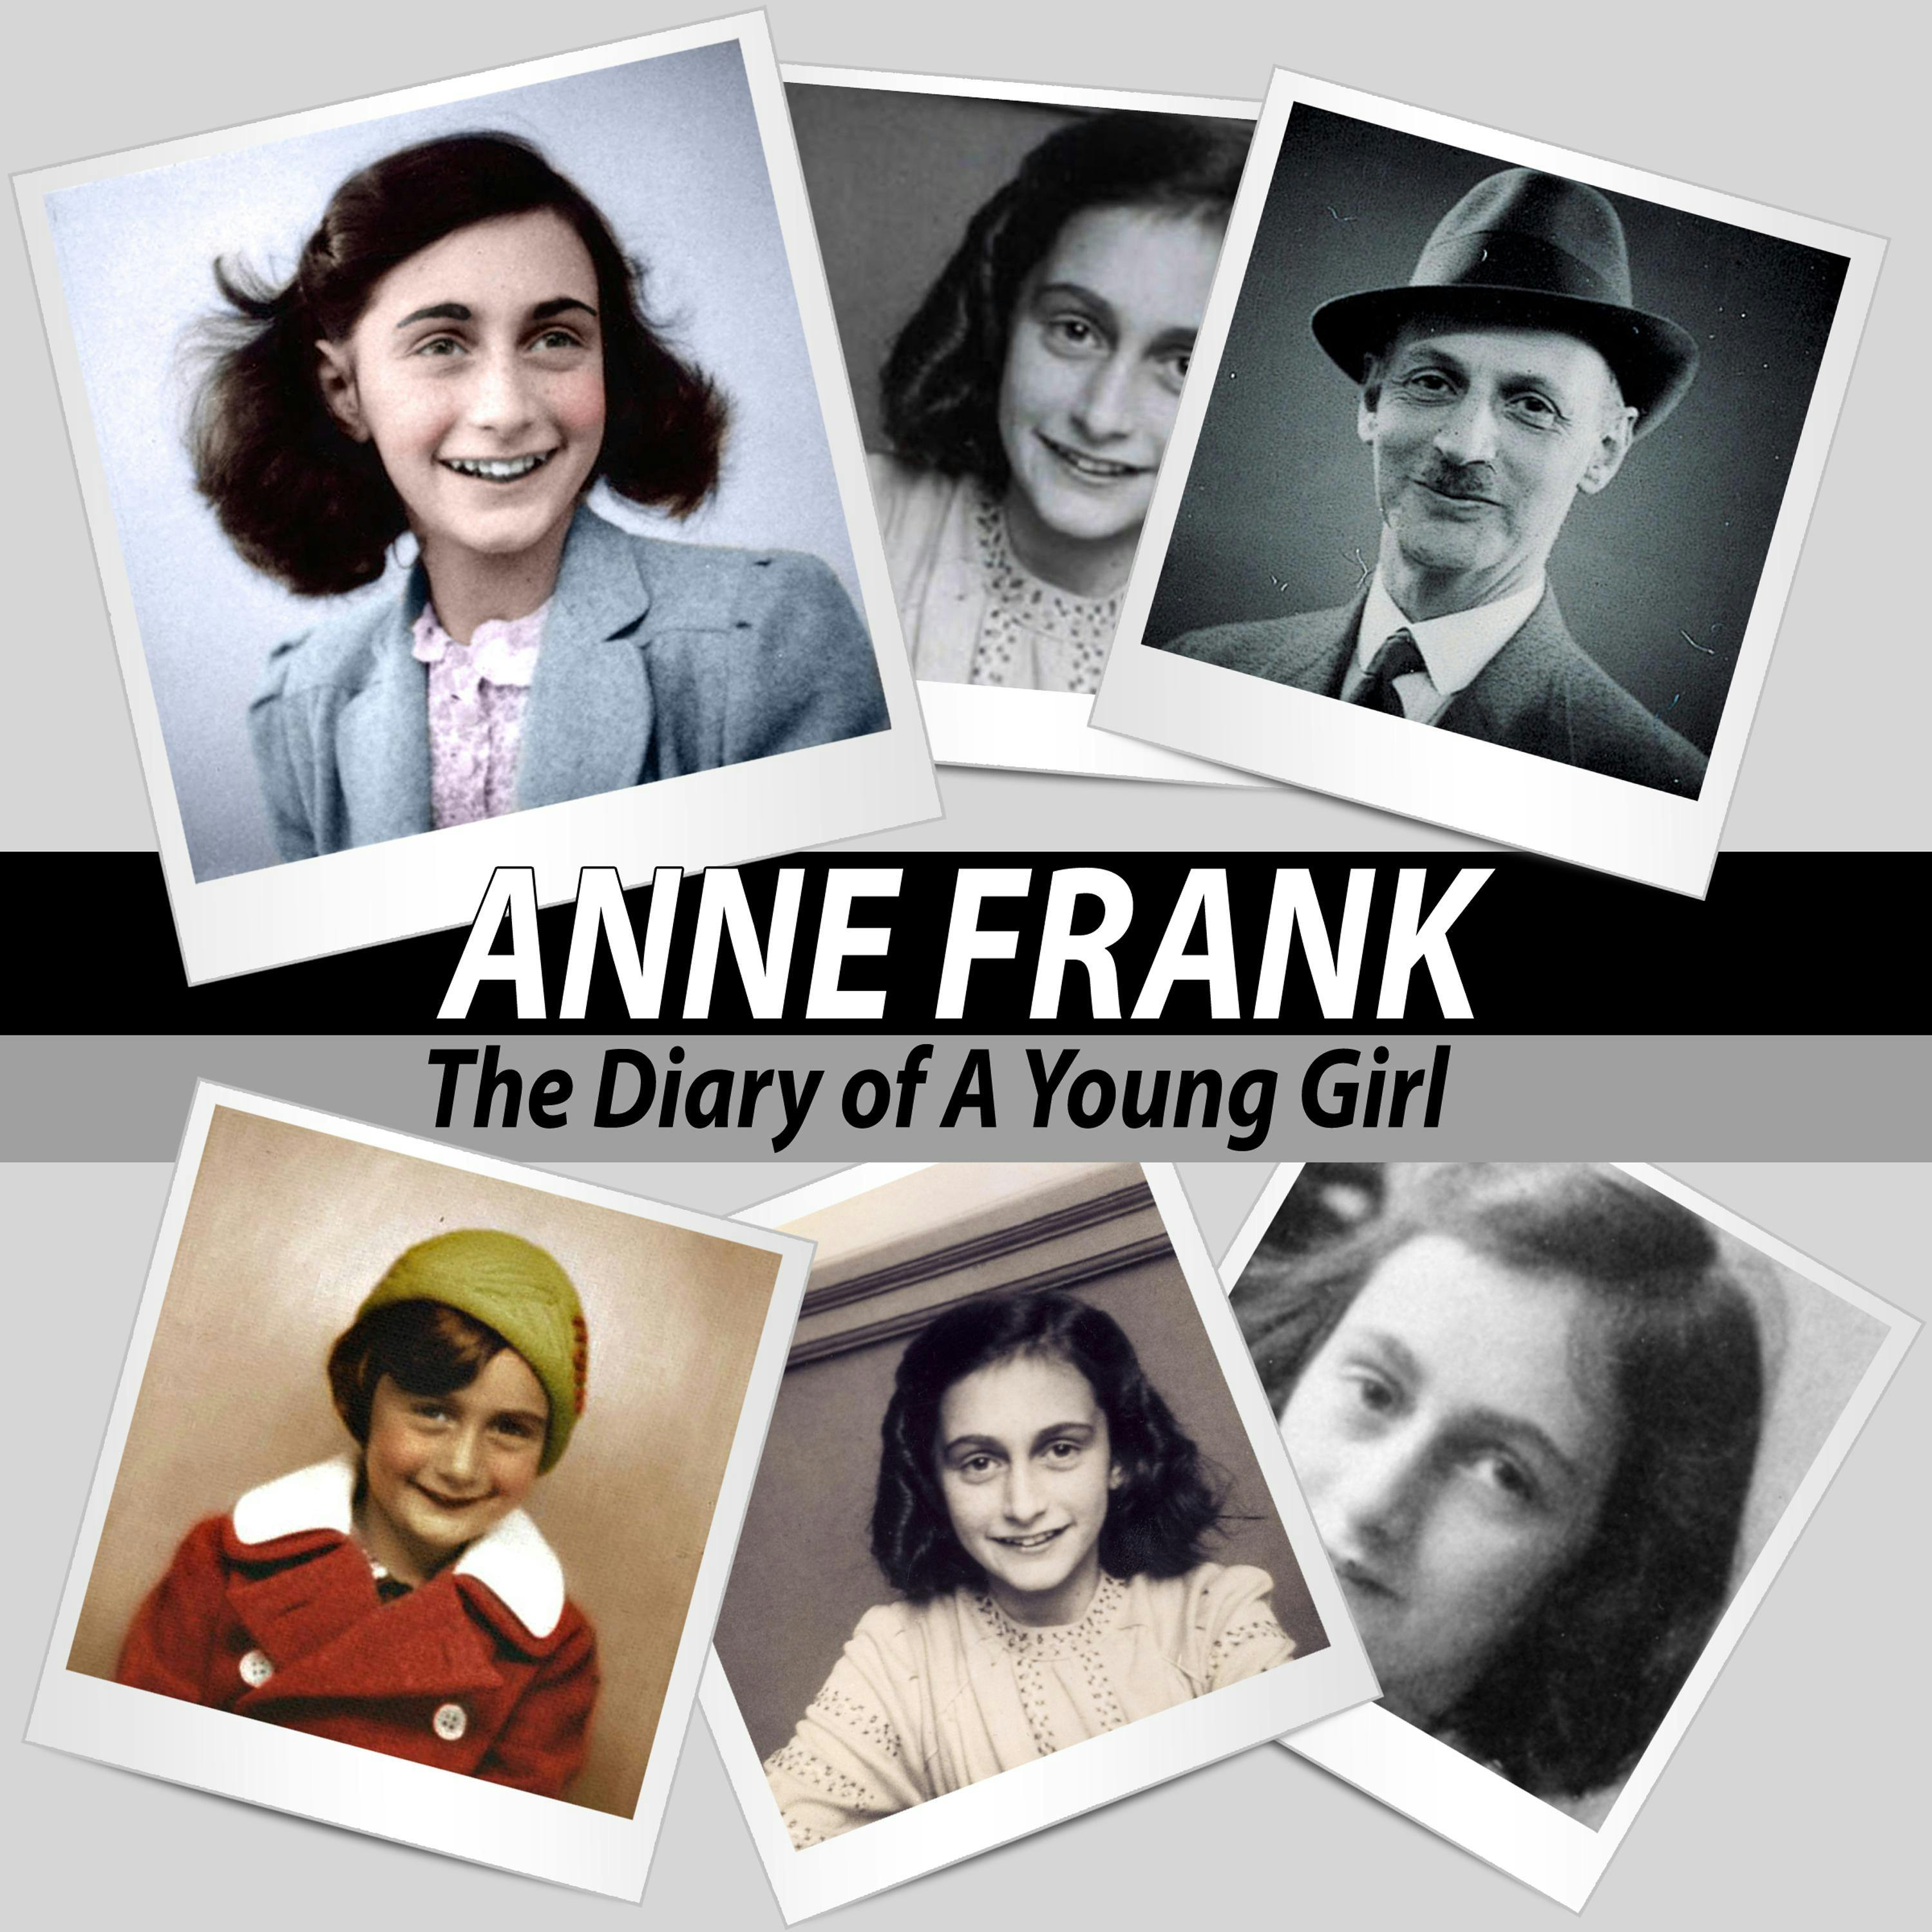 Anne Frank: The Diary of a Young Girl - Anne Frank